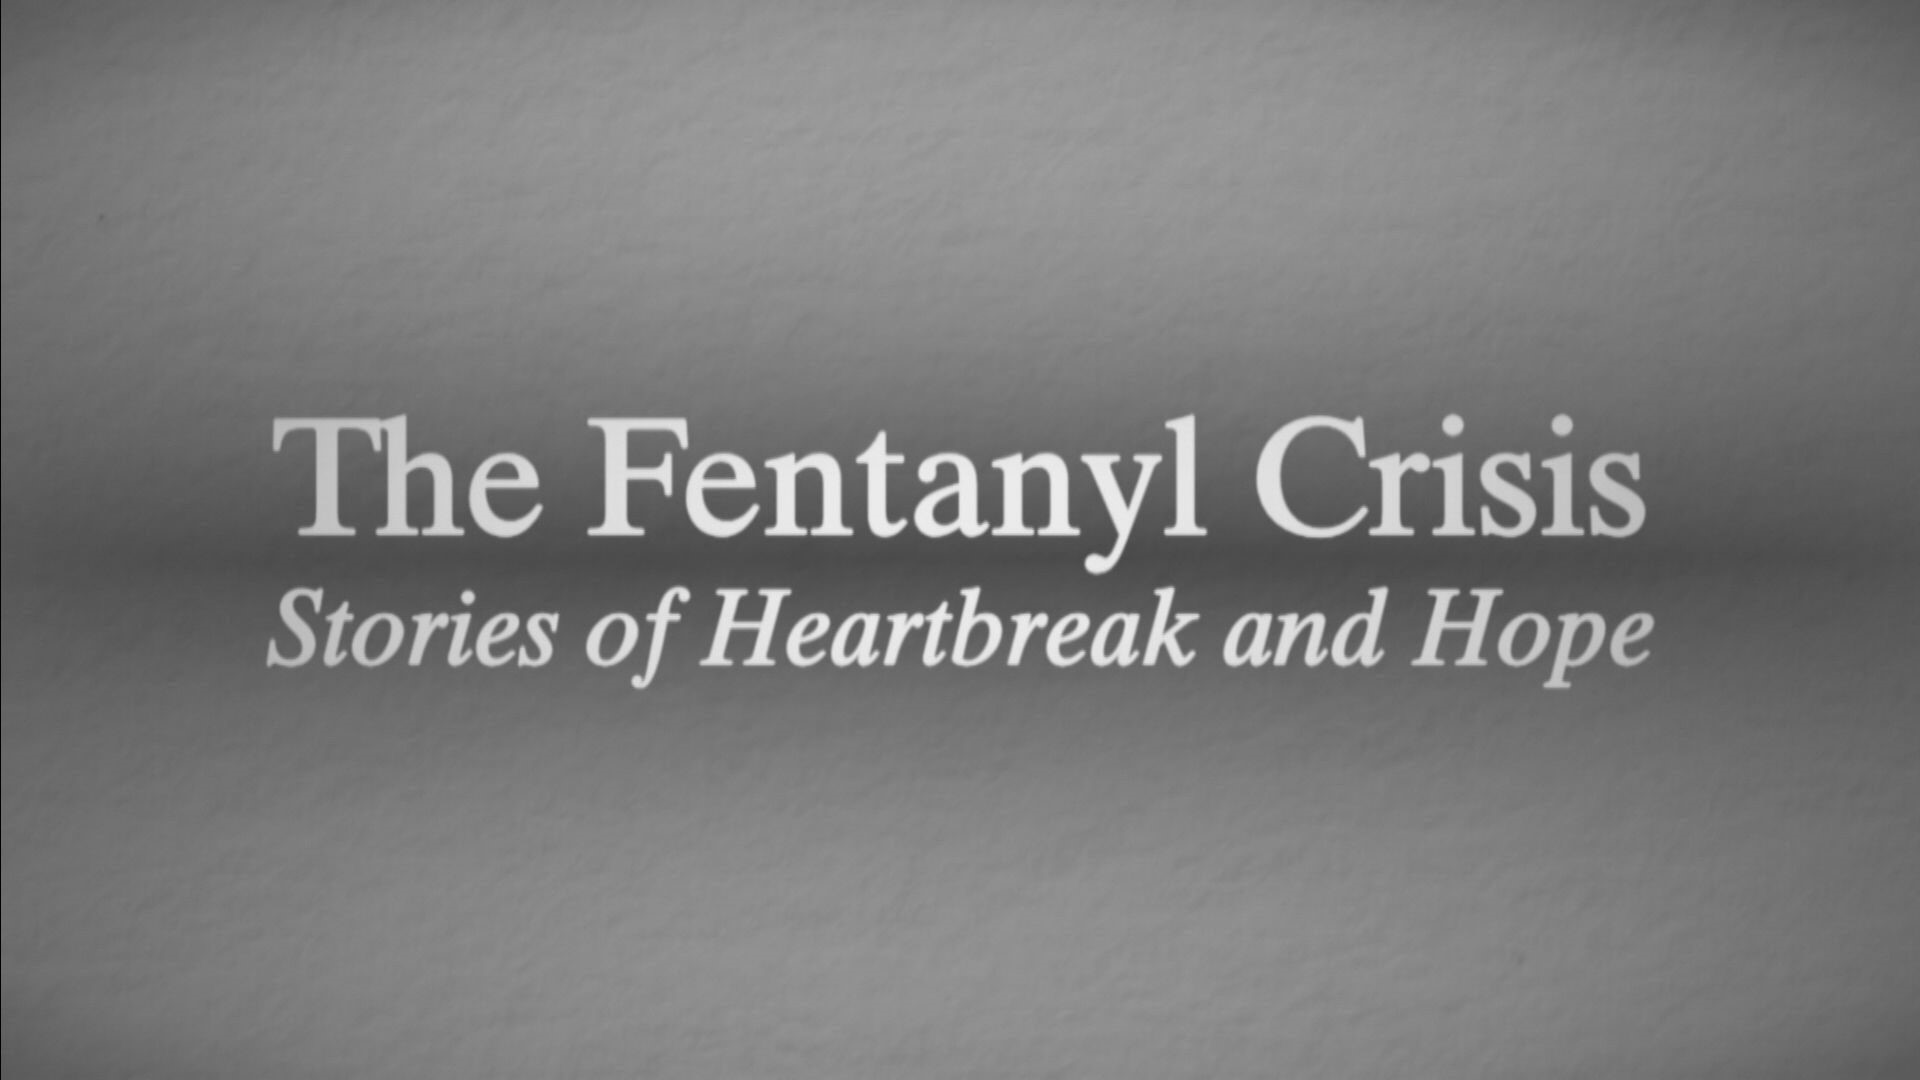 The community of those who lost loved ones to fentanyl is quickly growing. WVEC shows how many are now looking to bring attention to this problem and find solutions.